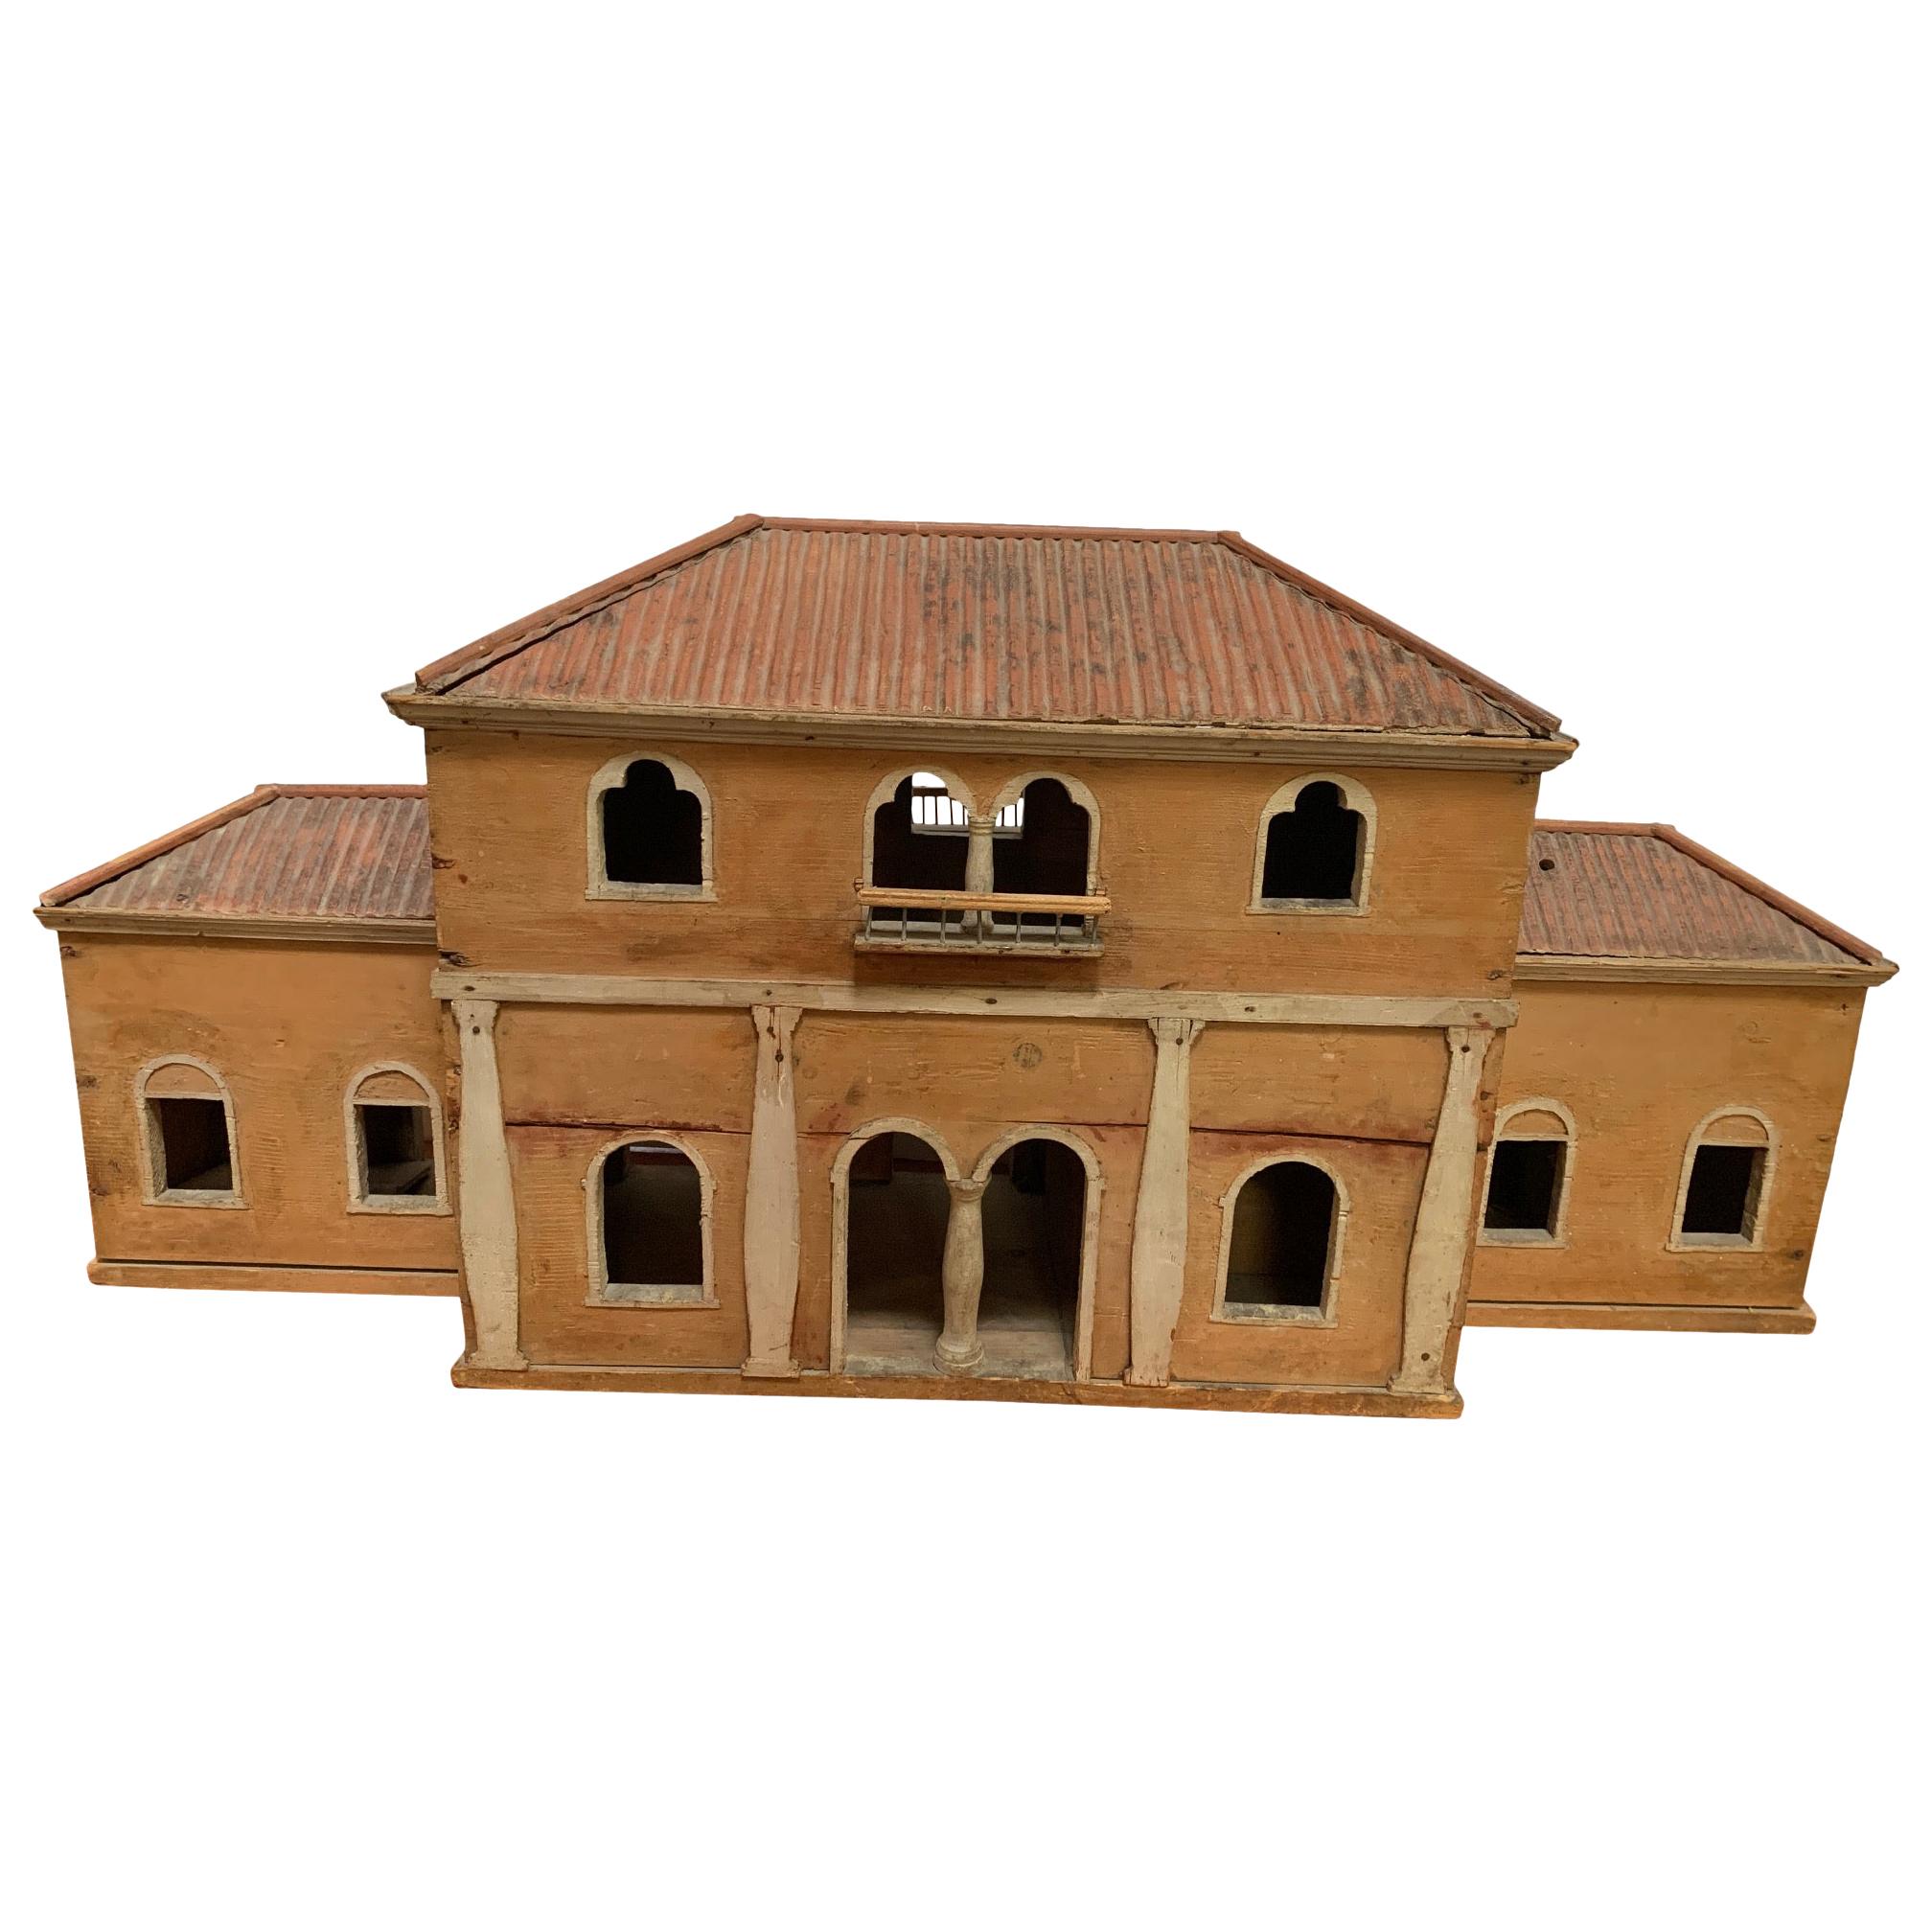 Architectural Painted Wood Model of an Italian Villa